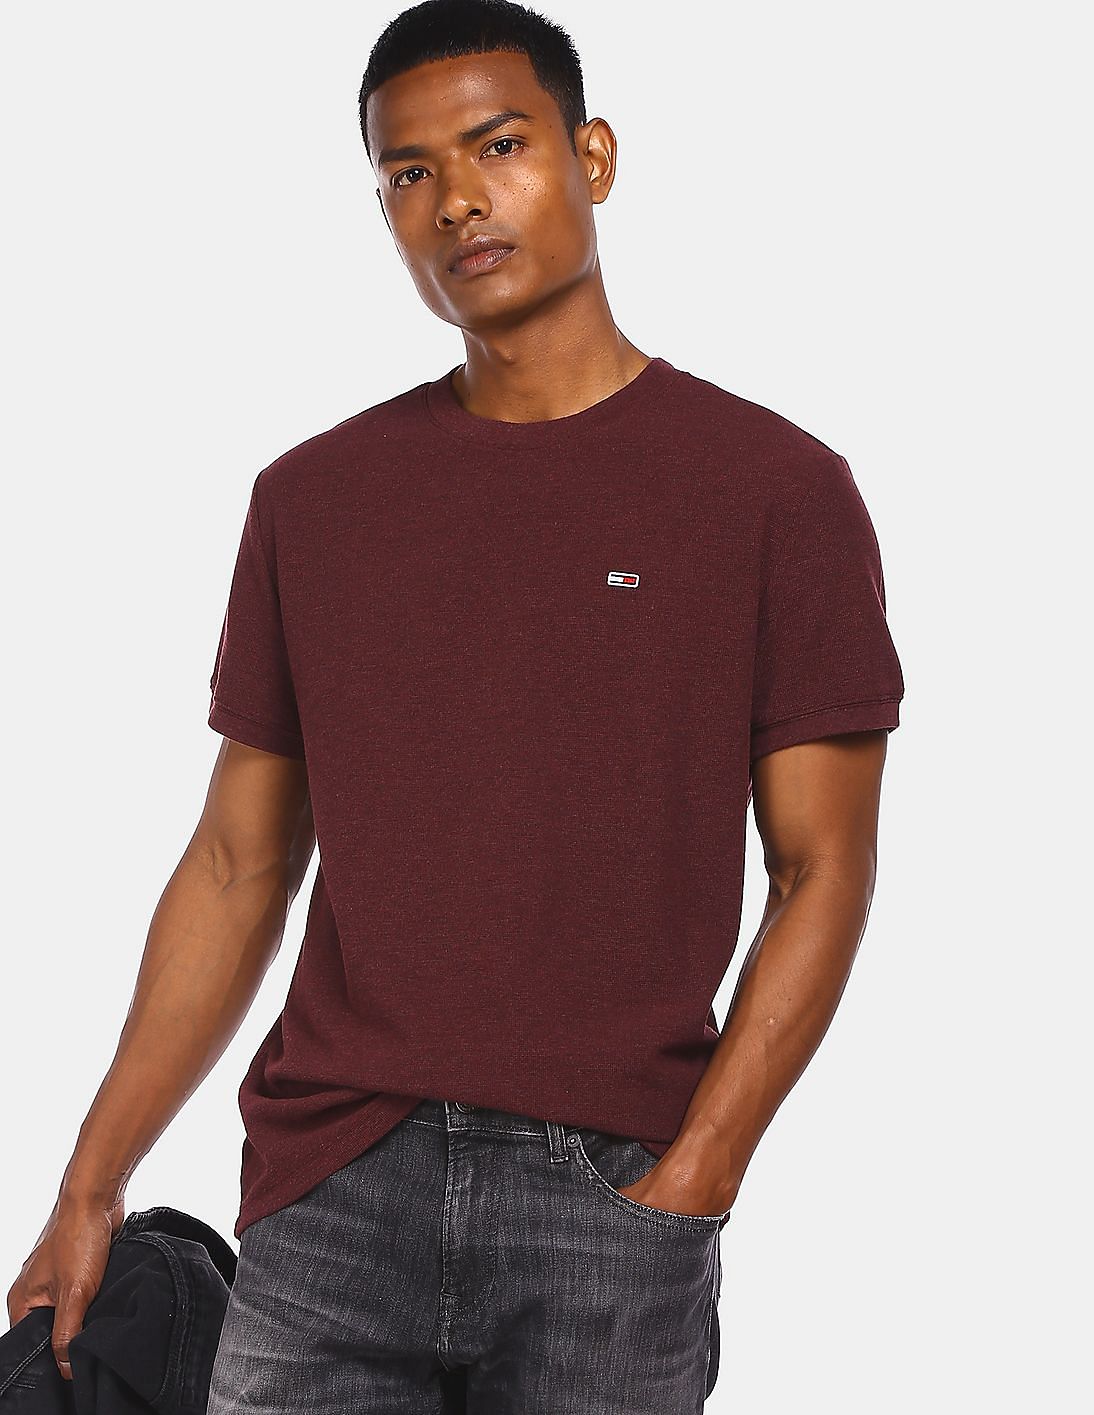 Buy Tommy Hilfiger Men Wine Red Waffle Knit Heathered T-Shirt - NNNOW.com